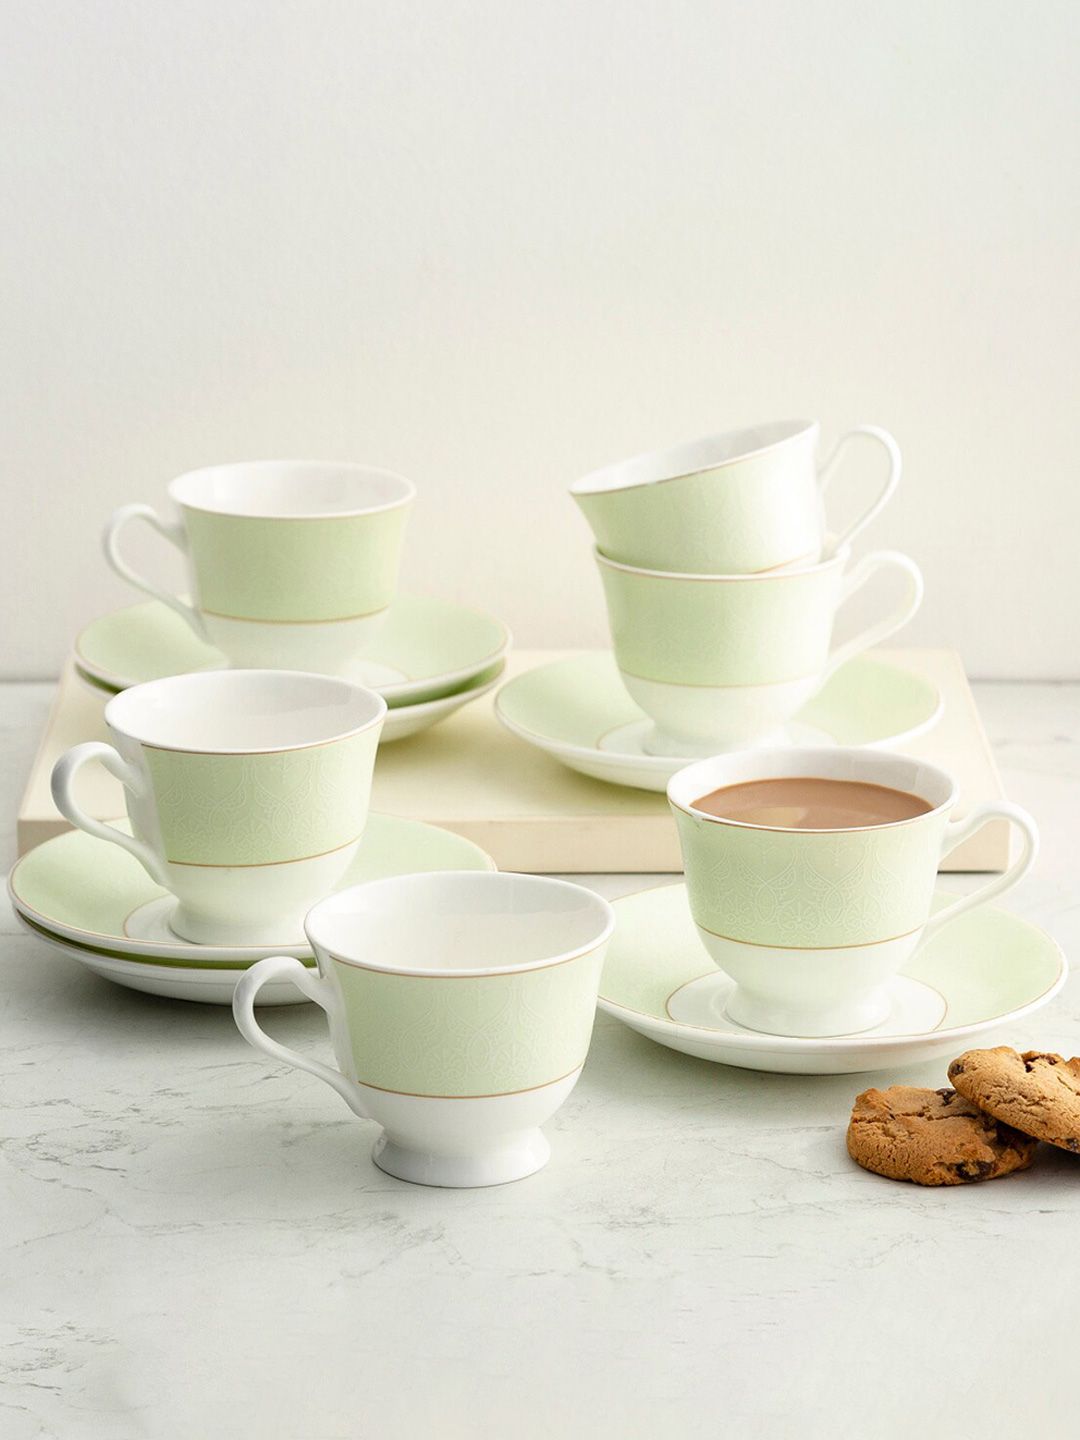 Home Centre White & Green Set of 6 Printed Bone China Glossy Cups and Saucers Set Price in India